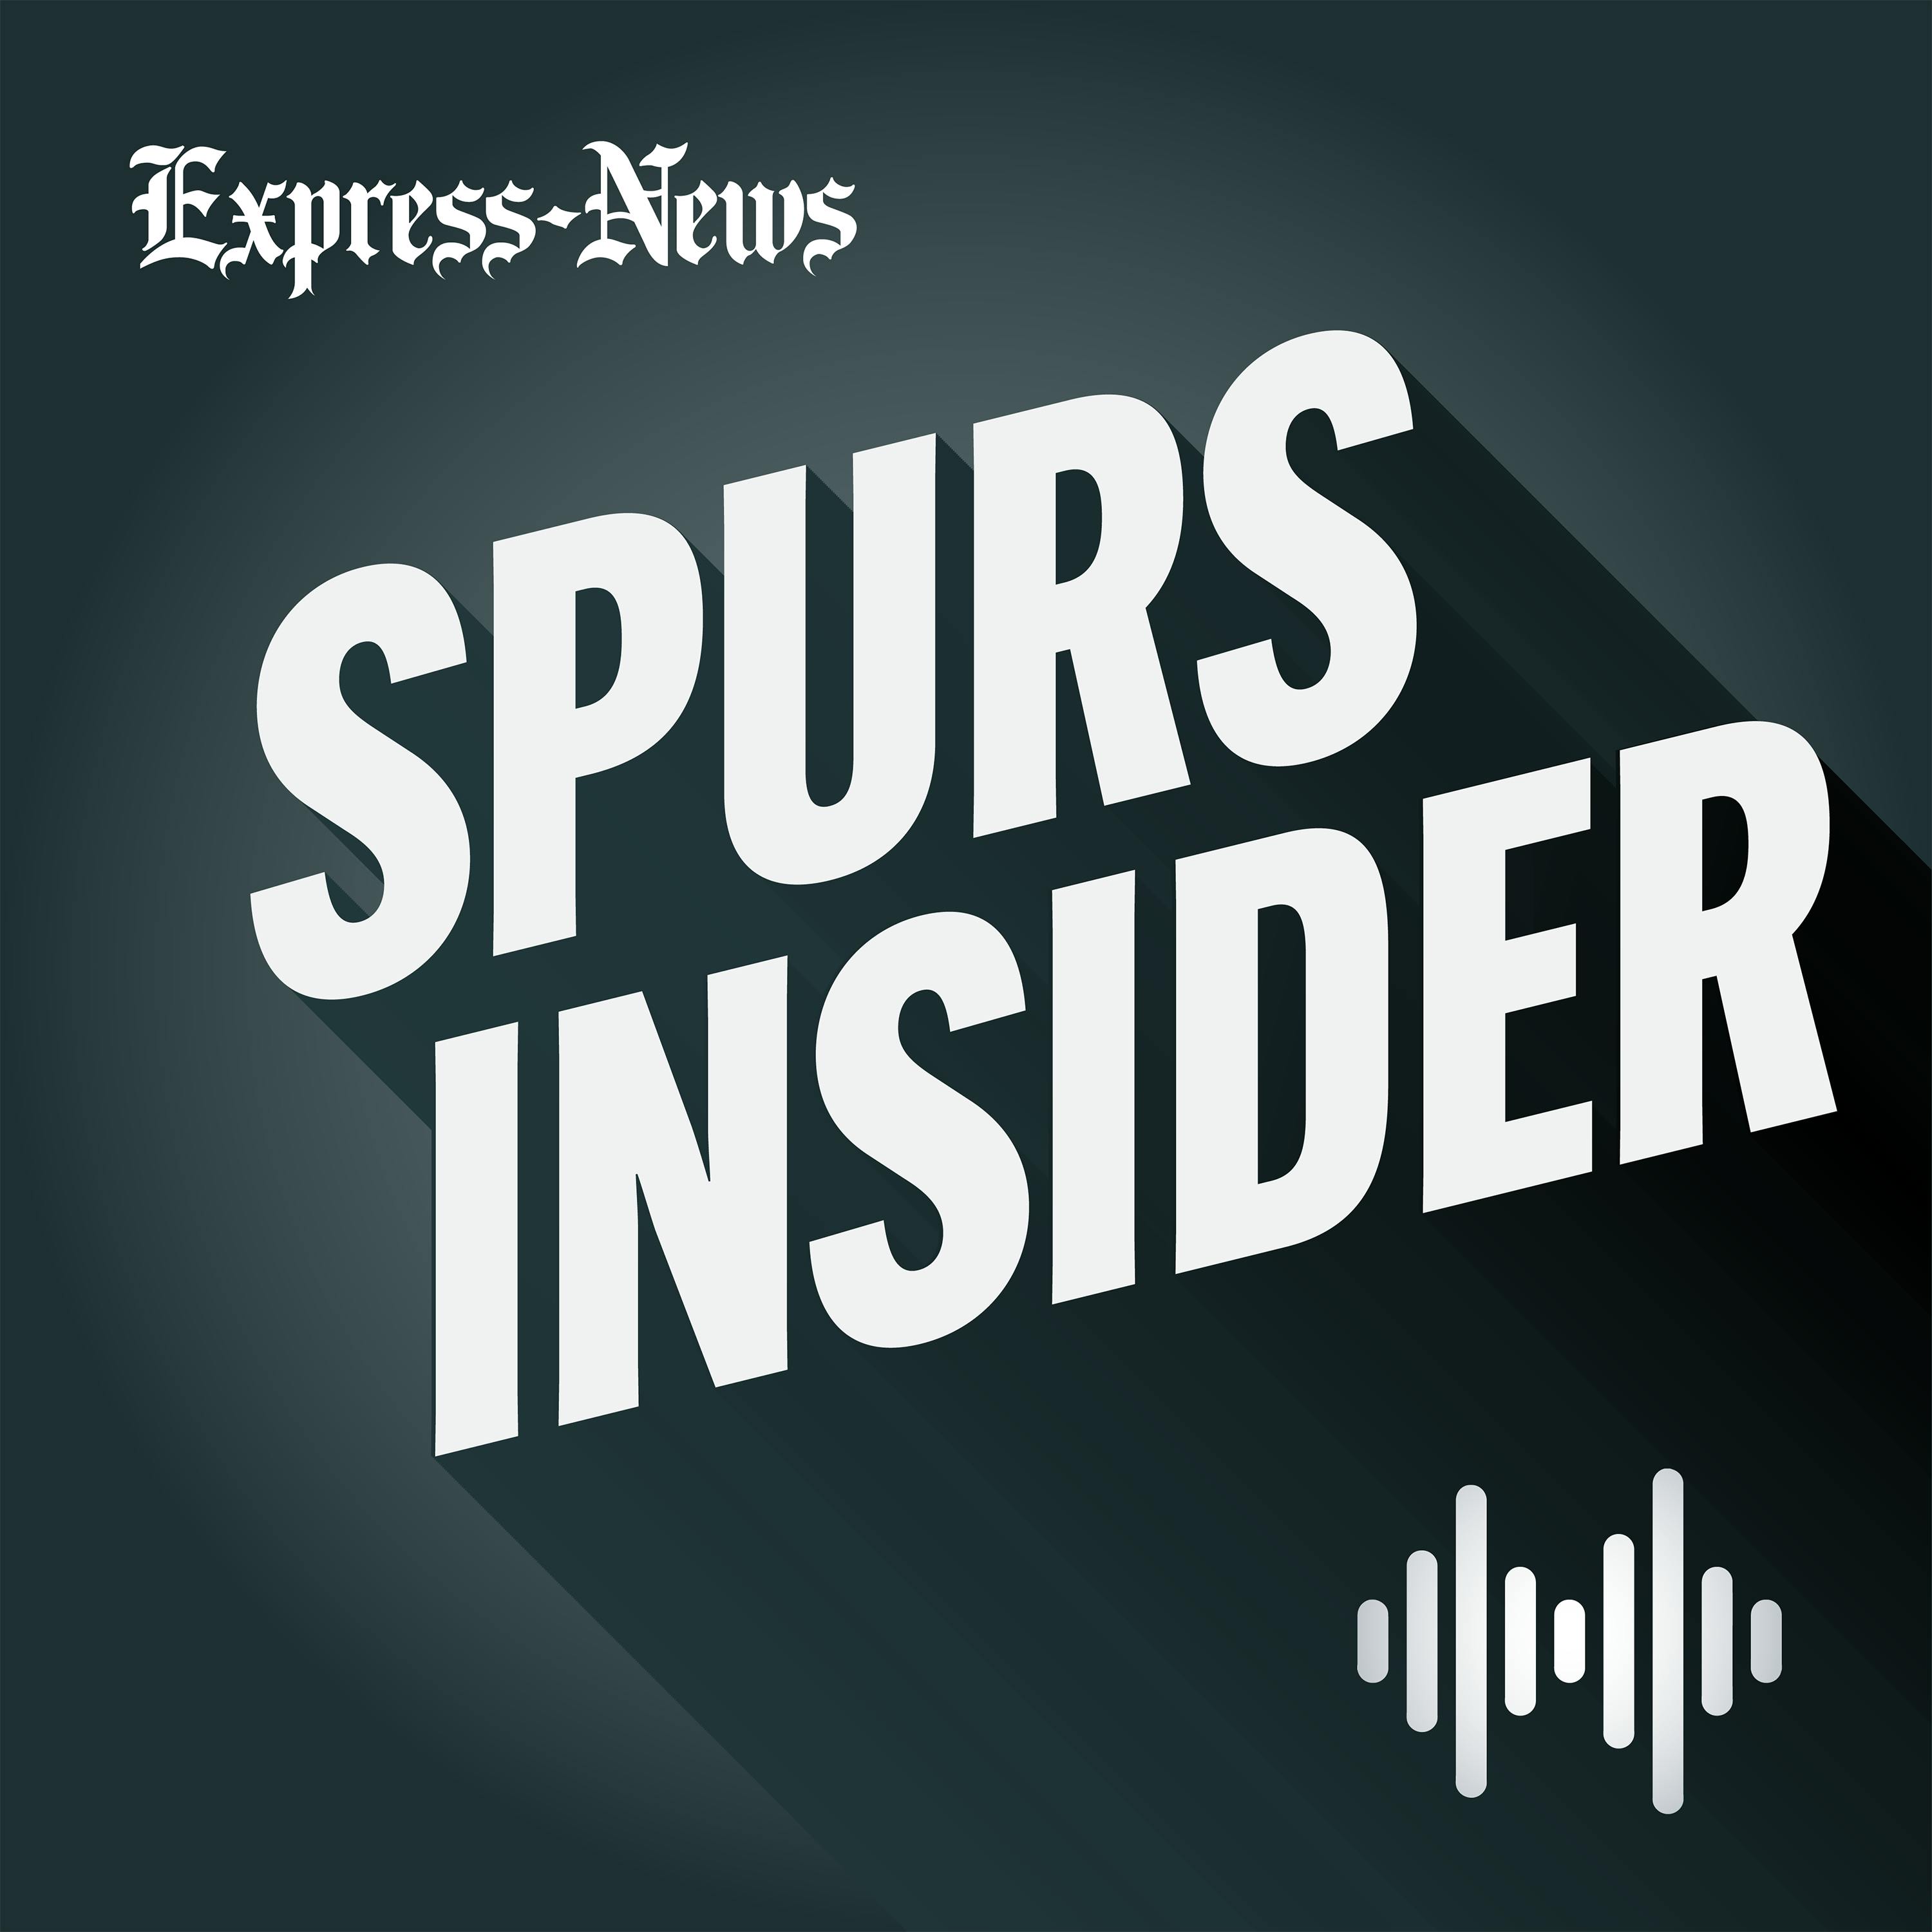 Episode 108: What challenges do the Spurs face in the play-in tournament?